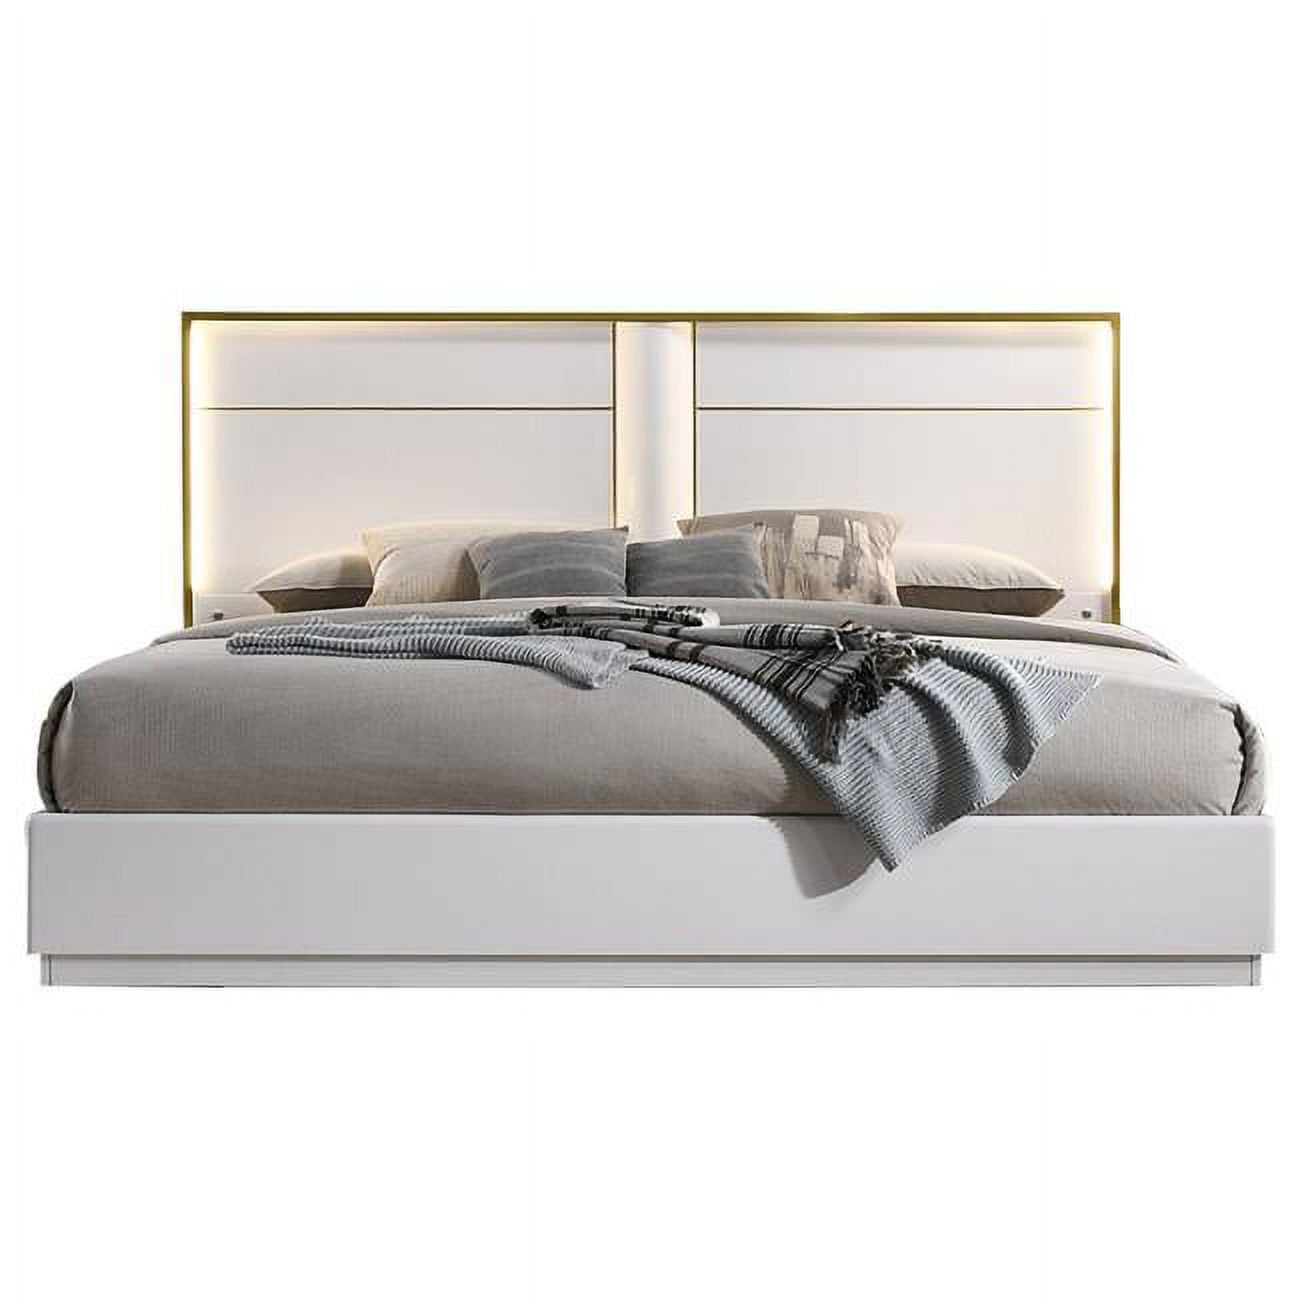 Havana Eastern King Bed Havana White With Gold Trimming Bed - King